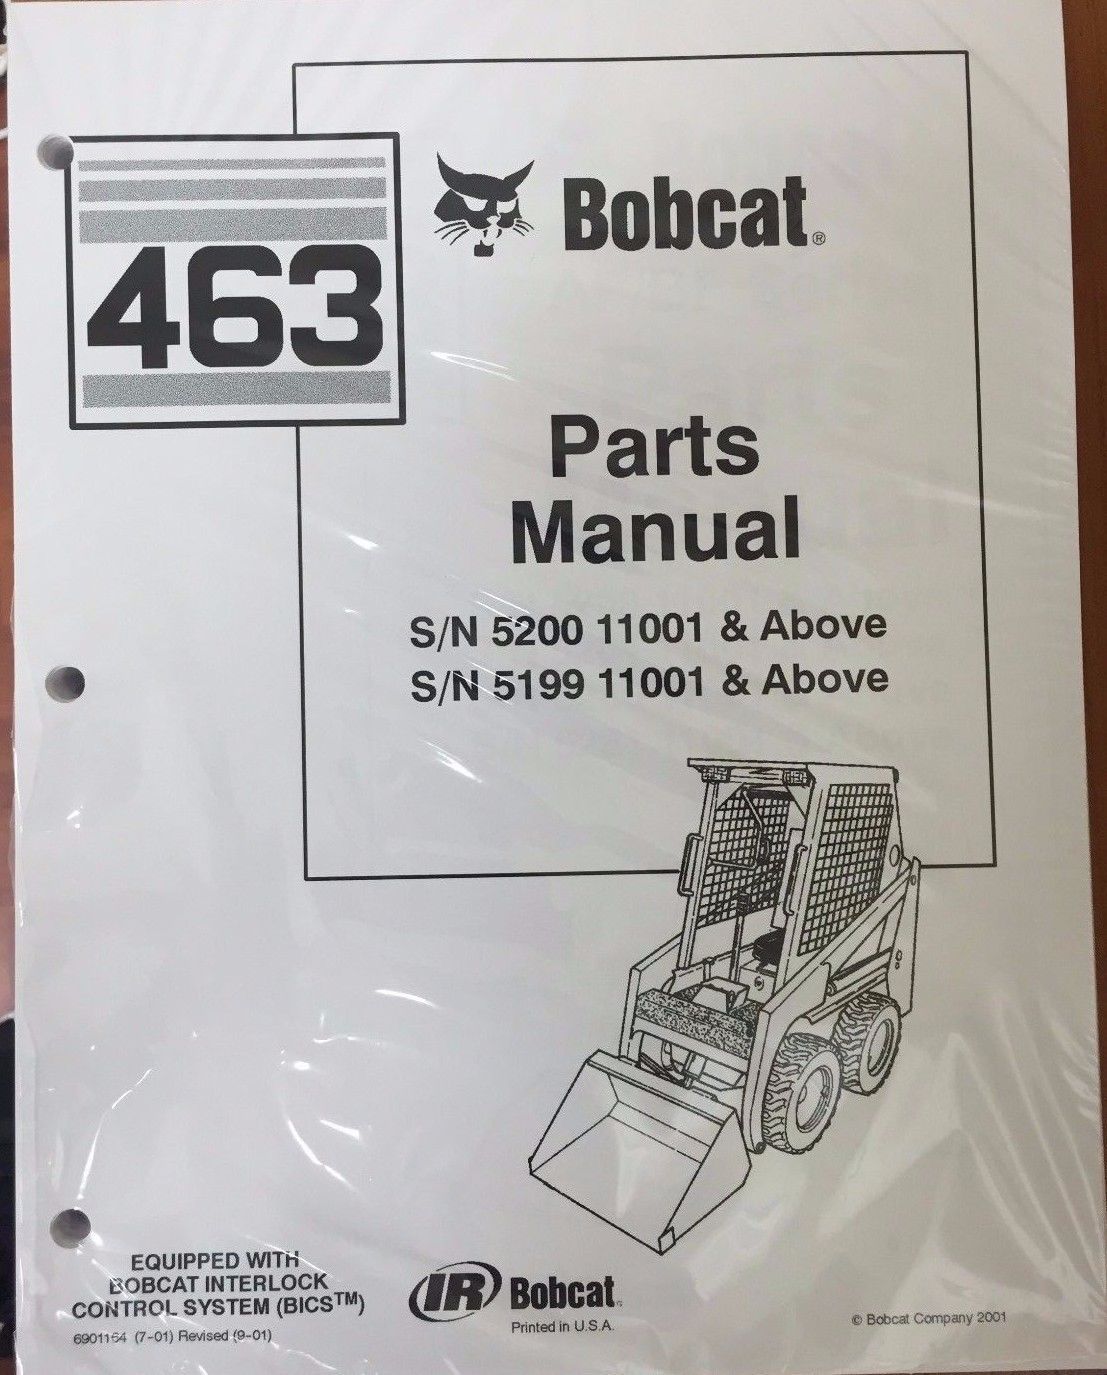 Primary image for Bobcat 463 Series Skid Steer Parts Catalog Manual - Part Number # 6901164